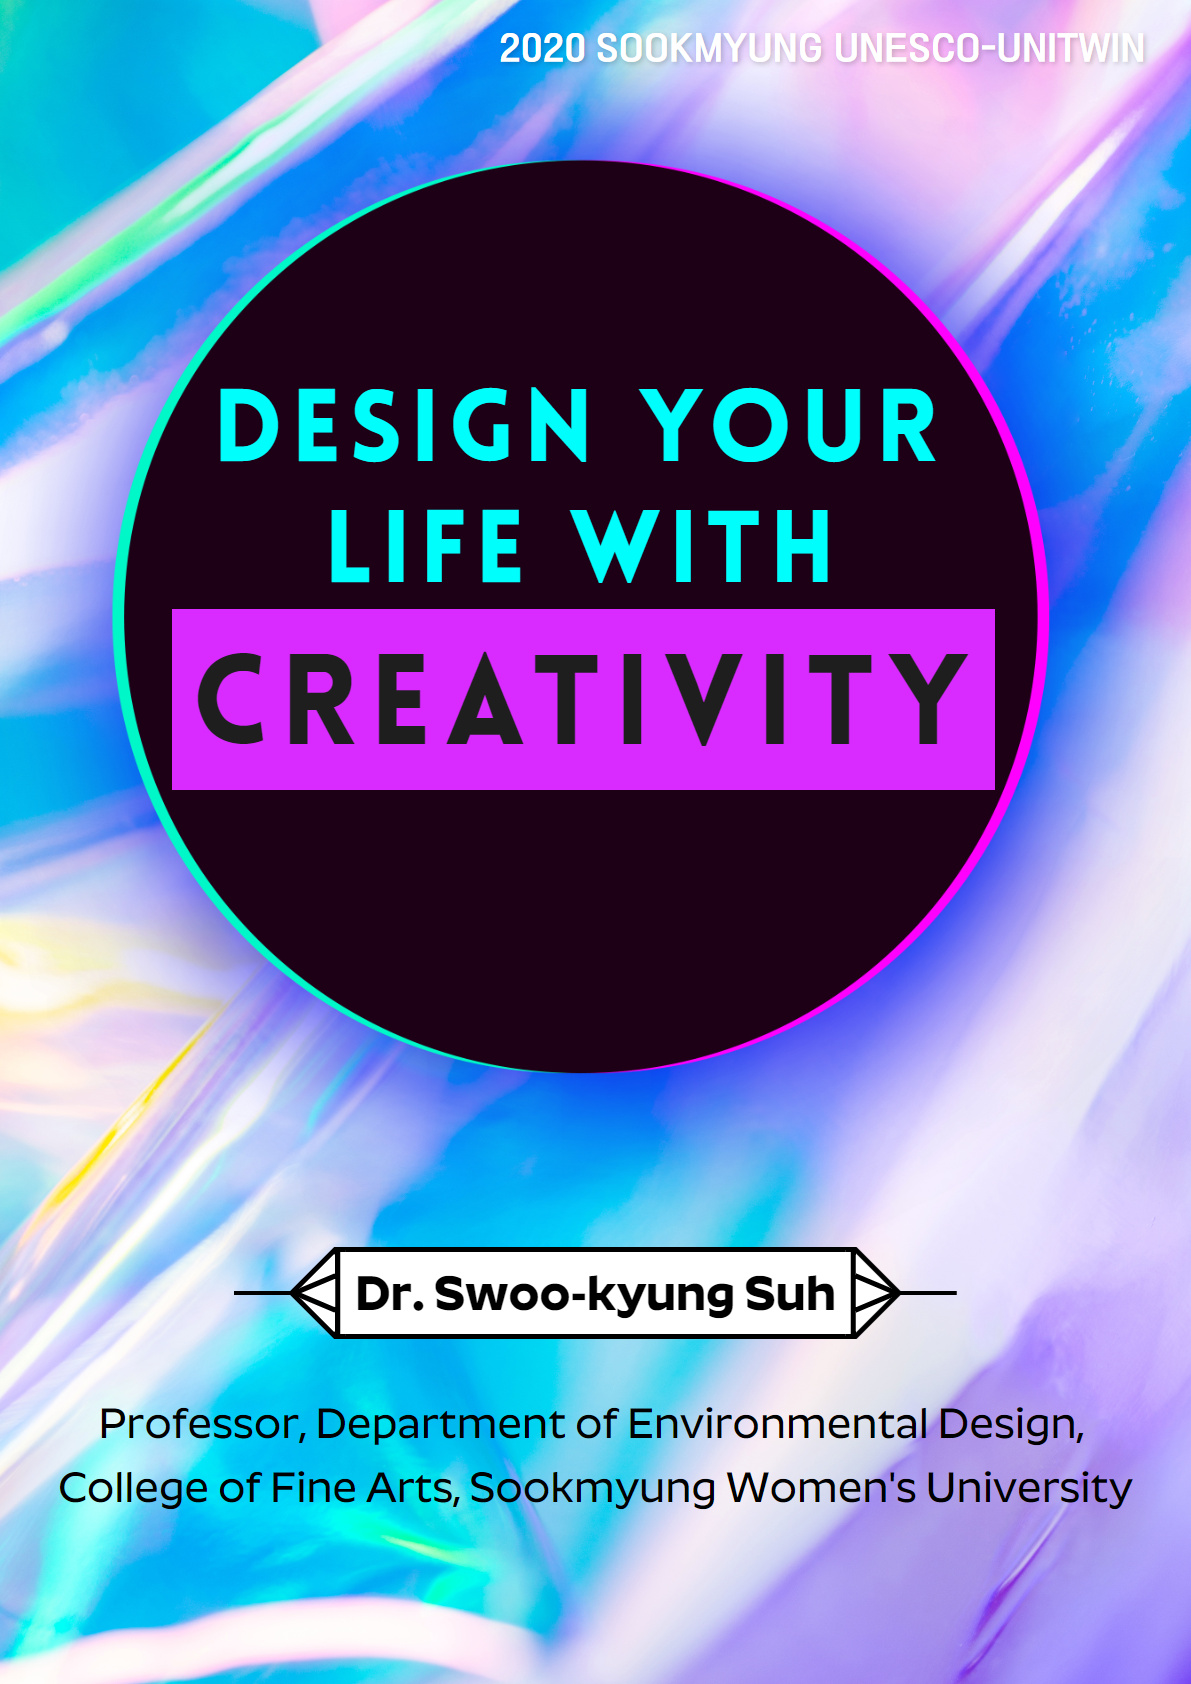 Design your life with creativity